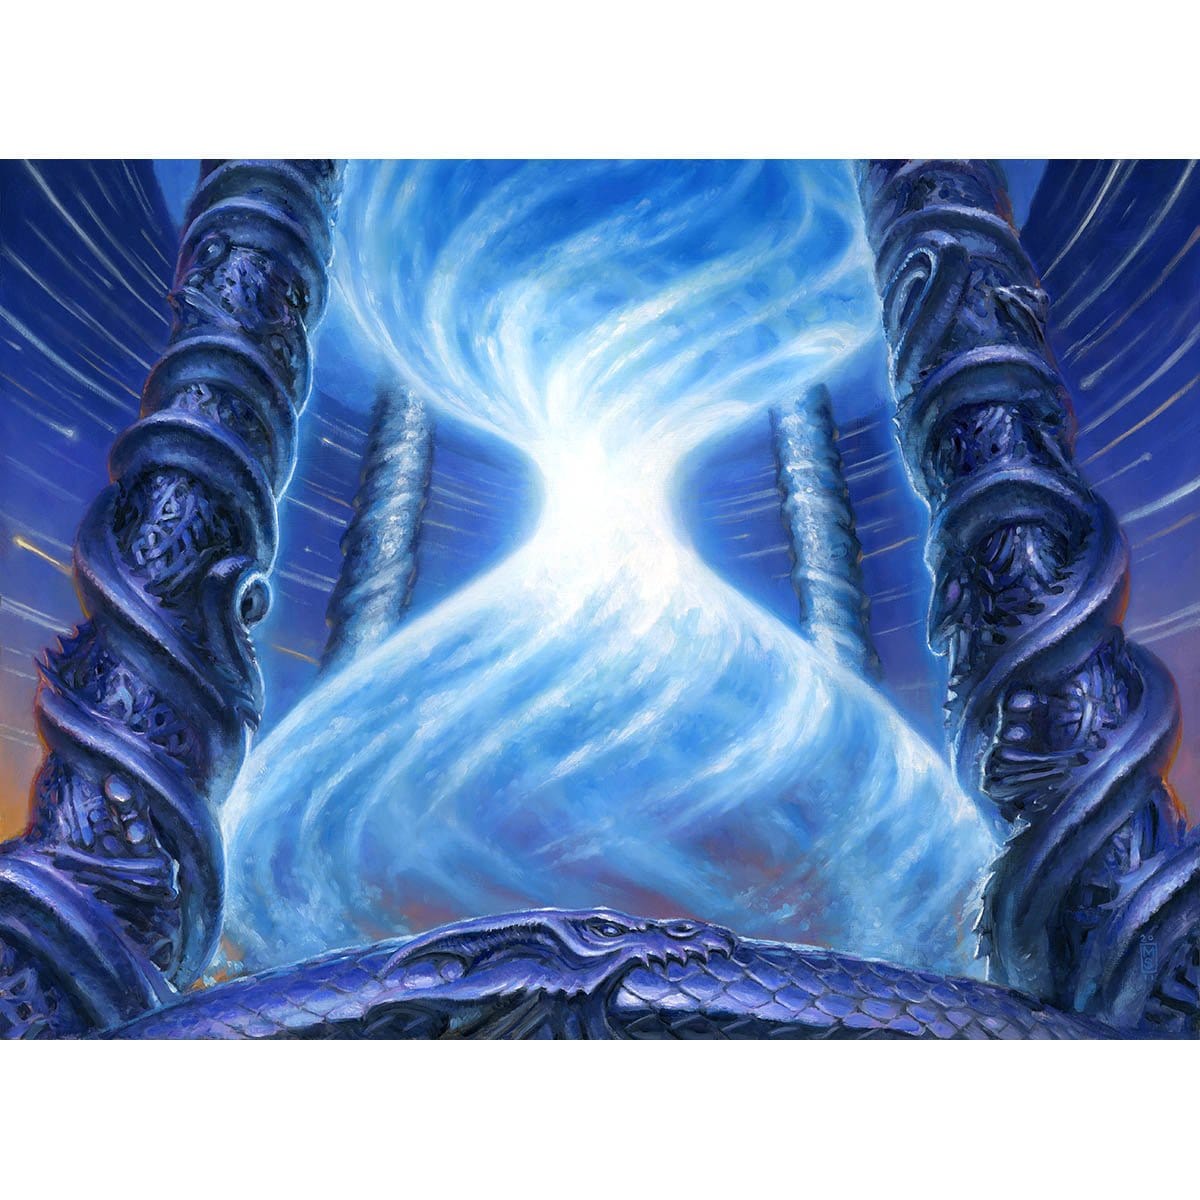 Timetwister Print - Print - Original Magic Art - Accessories for Magic the Gathering and other card games